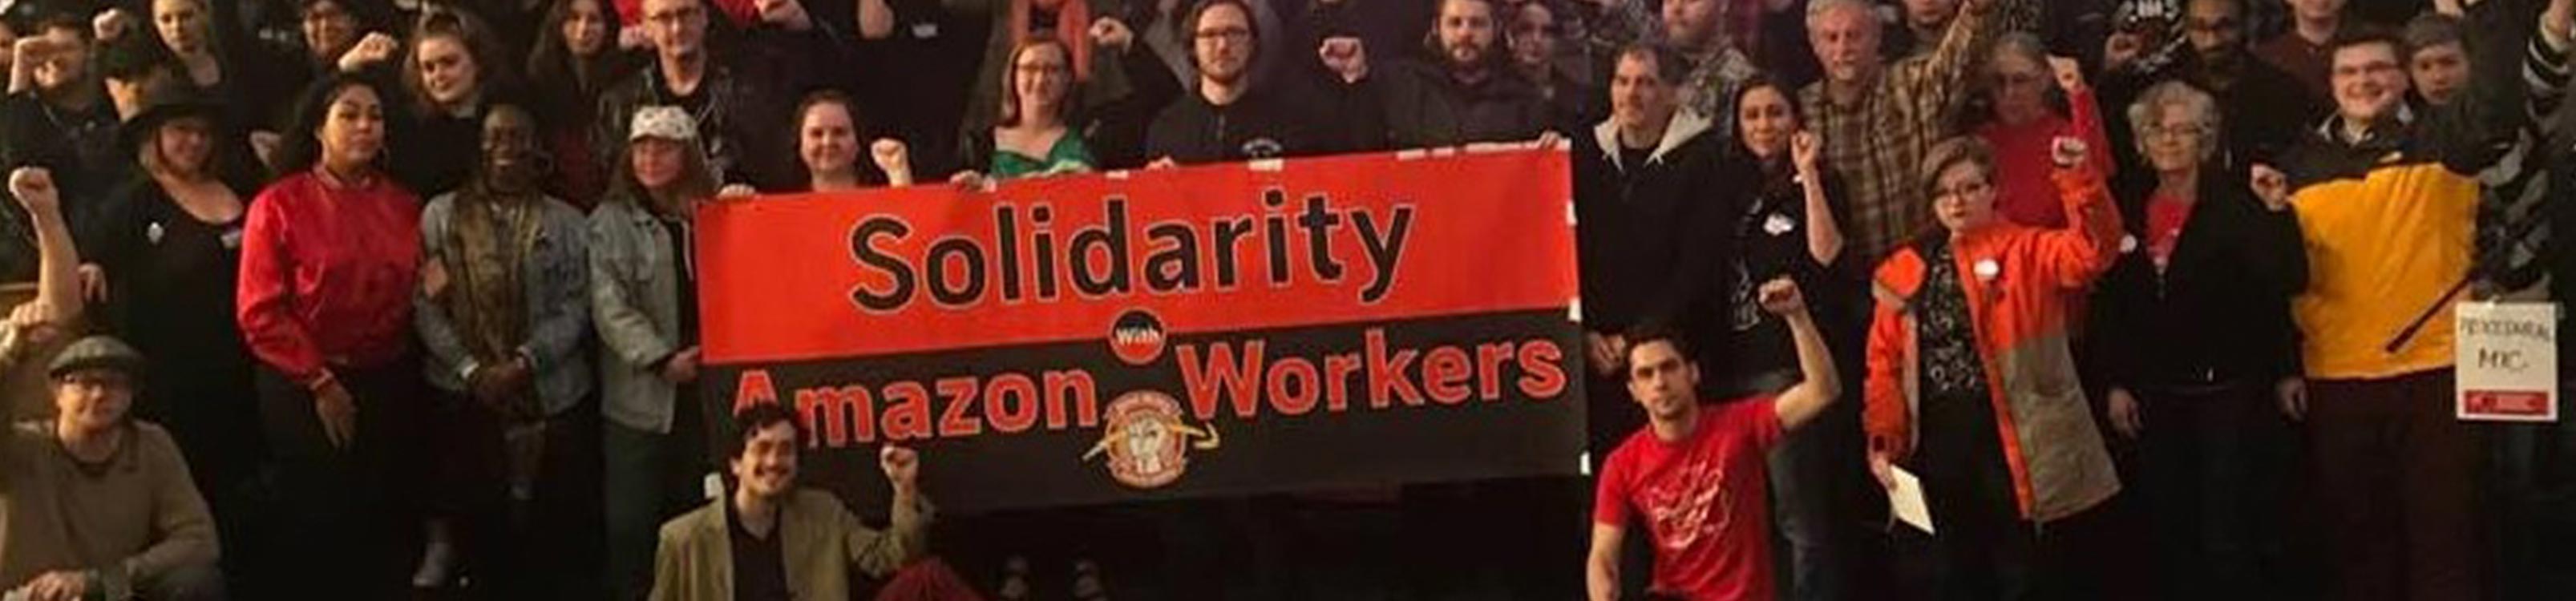 Image of a crowd with raised fists standing behind an Solidarity with Amazon Workers" banner.